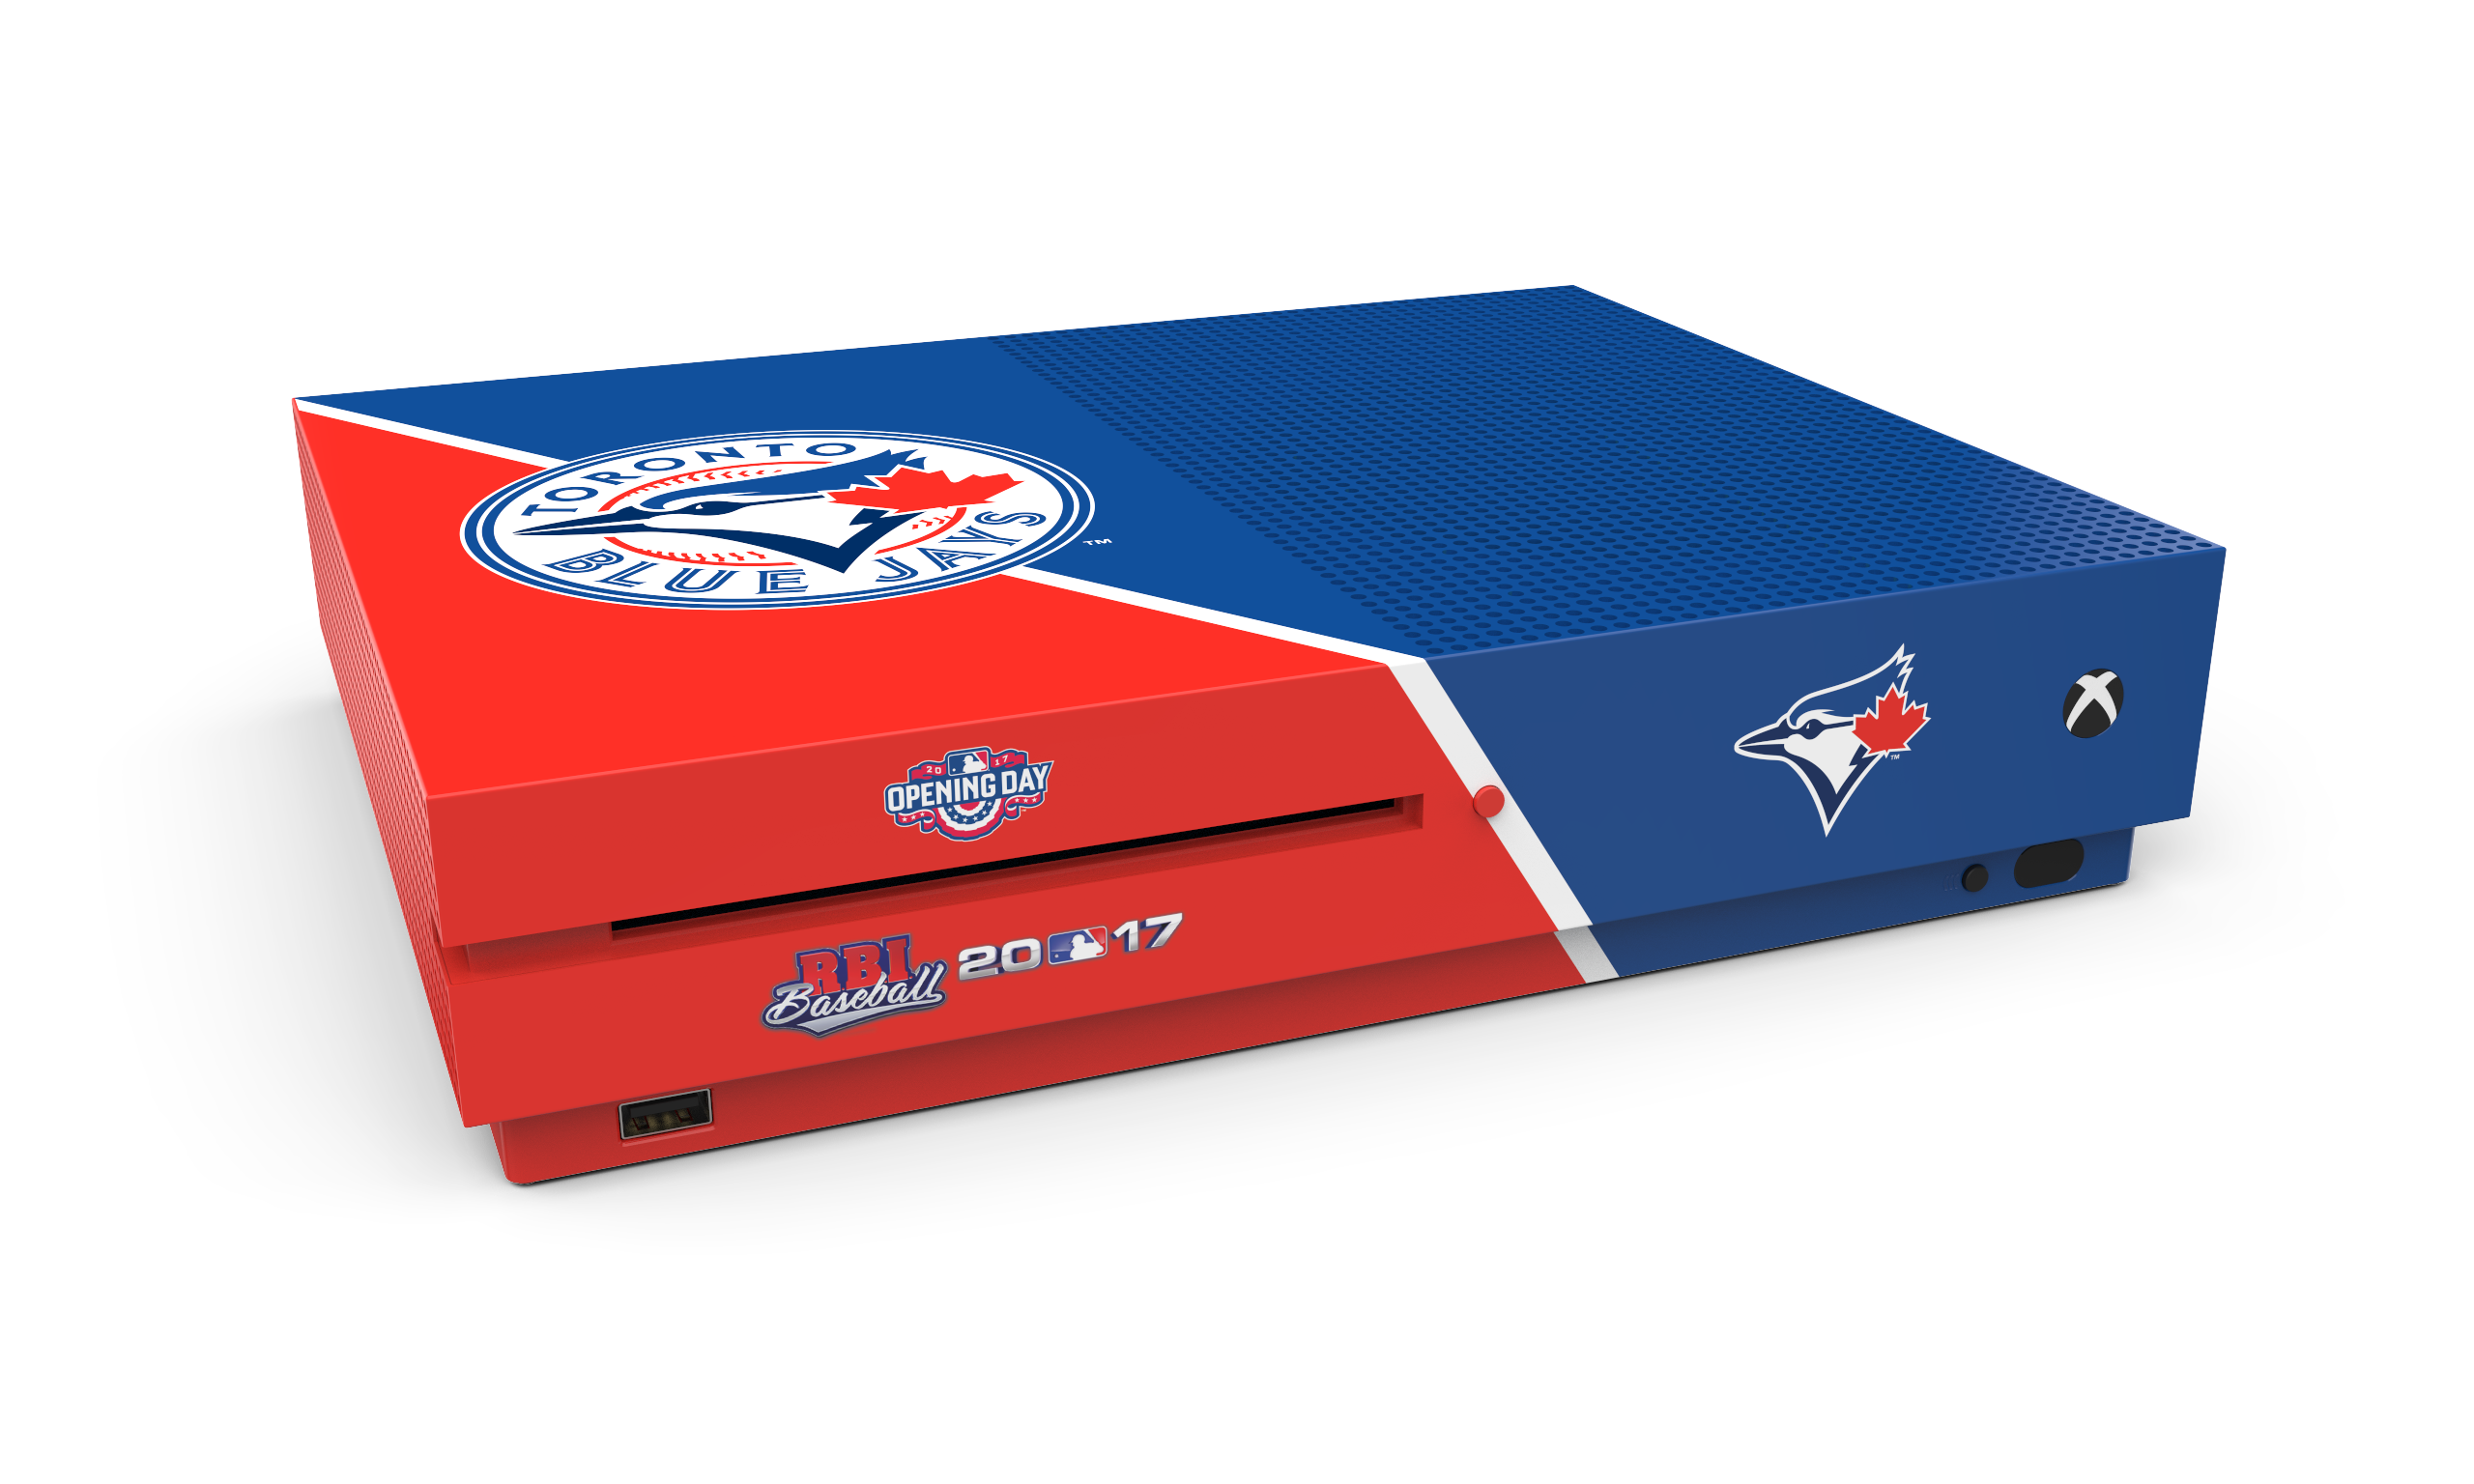  Microsoft Xbox Series S Toronto Blue Jays 2017 Opening Day Console